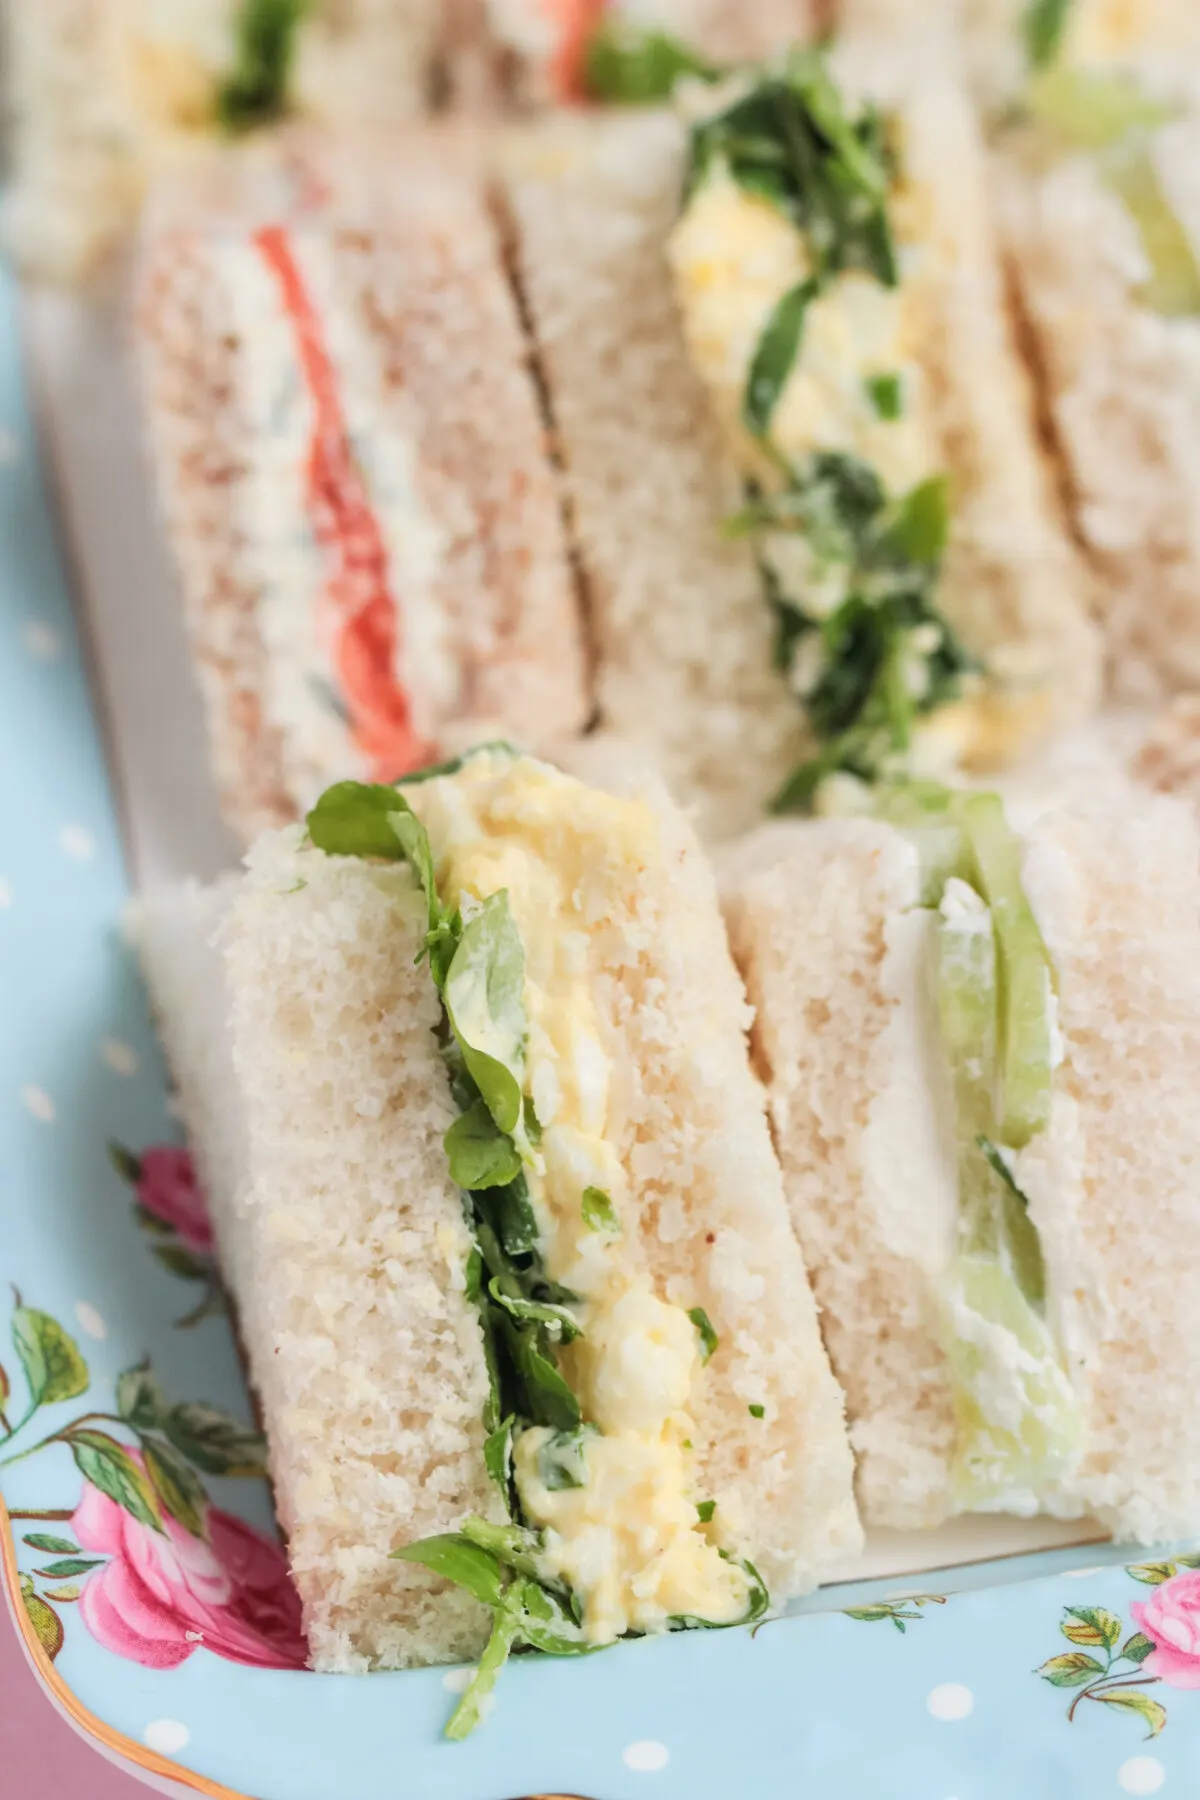 Discover classic afternoon tea sandwiches with our sumptuous egg and cress, refreshing cucumber and cream cheese, and elegant smoked salmon.